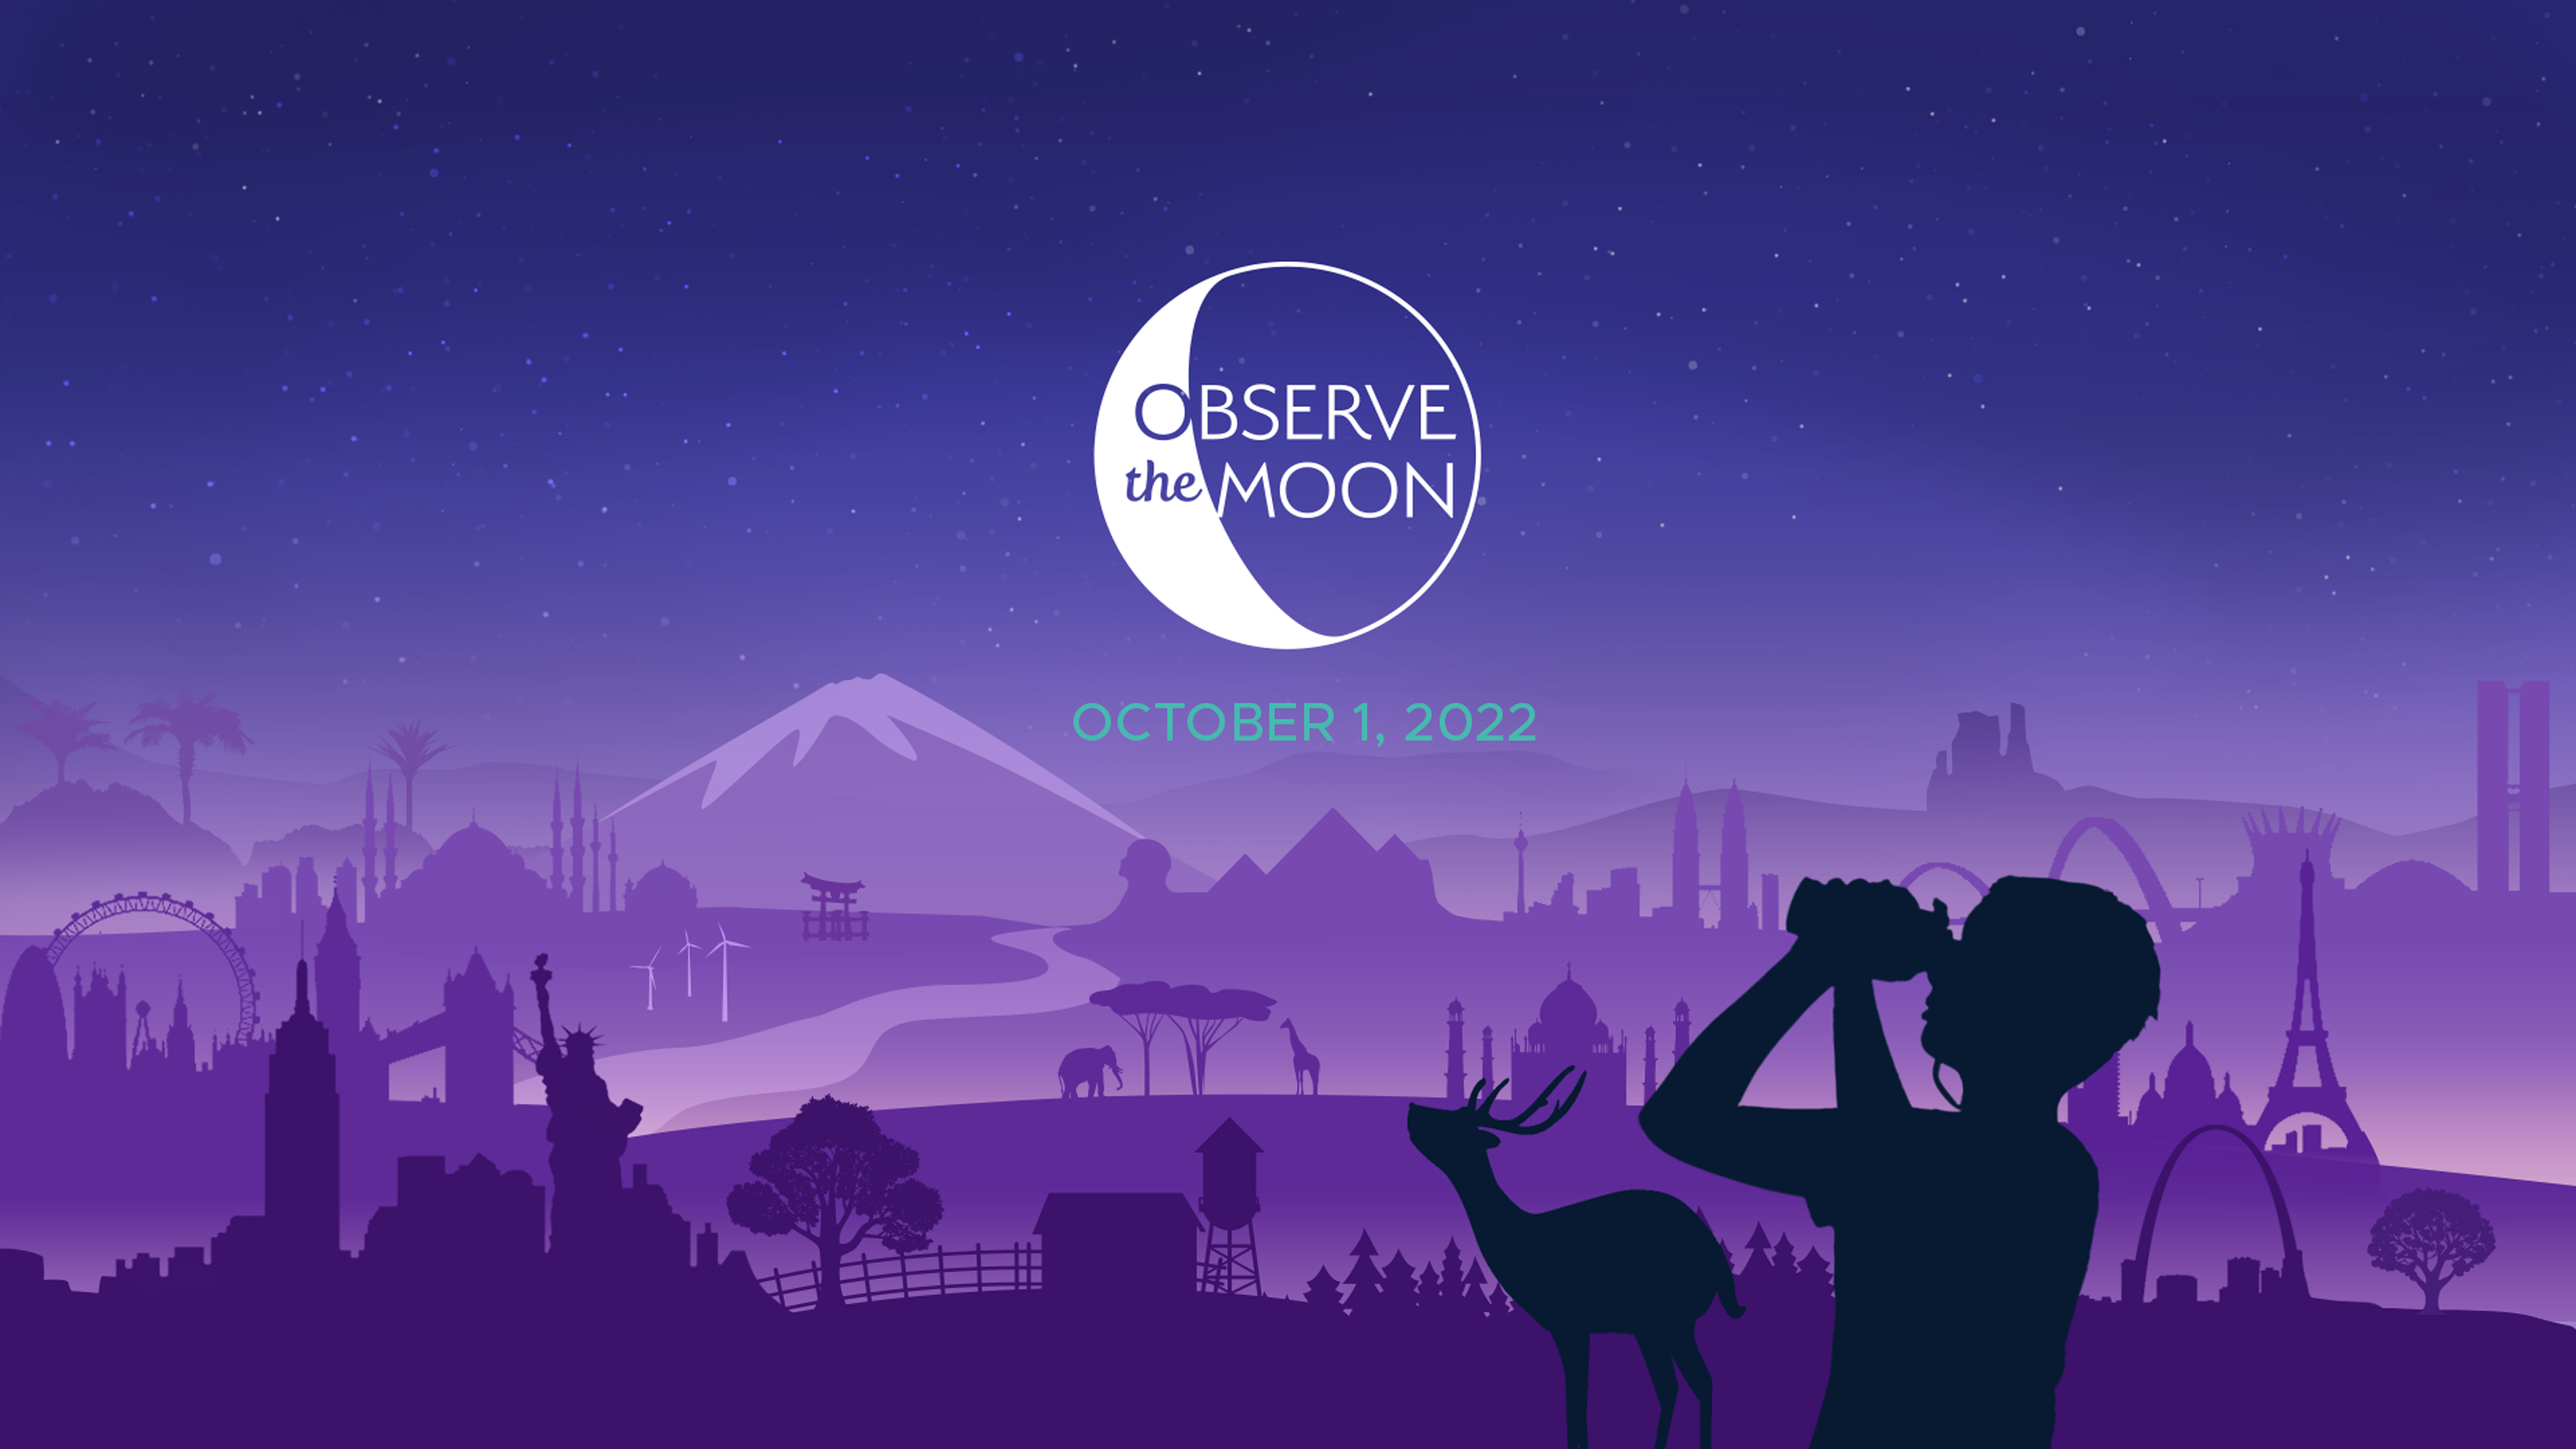 slide 1 - Illustration of imagined landscape with world landmarks, silhouette of a person looking up at the moon